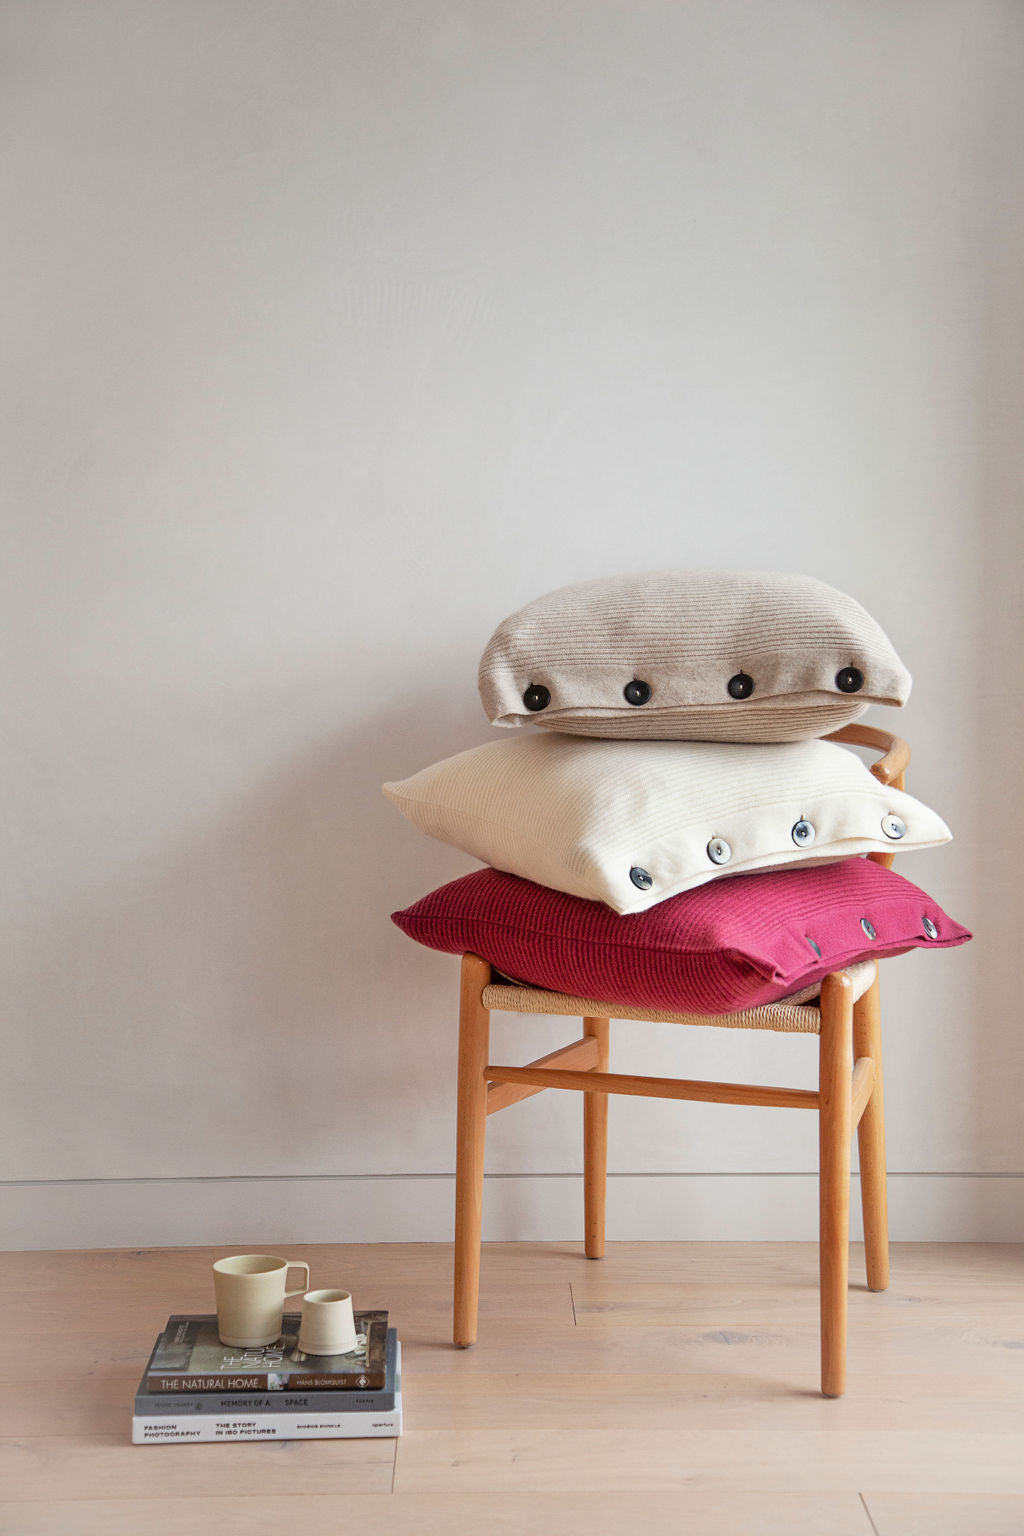 Pictured: latte, white, and poppy pillows stacked on a chair. On the floor next to the chair is a mug and cream holder on top of three books.